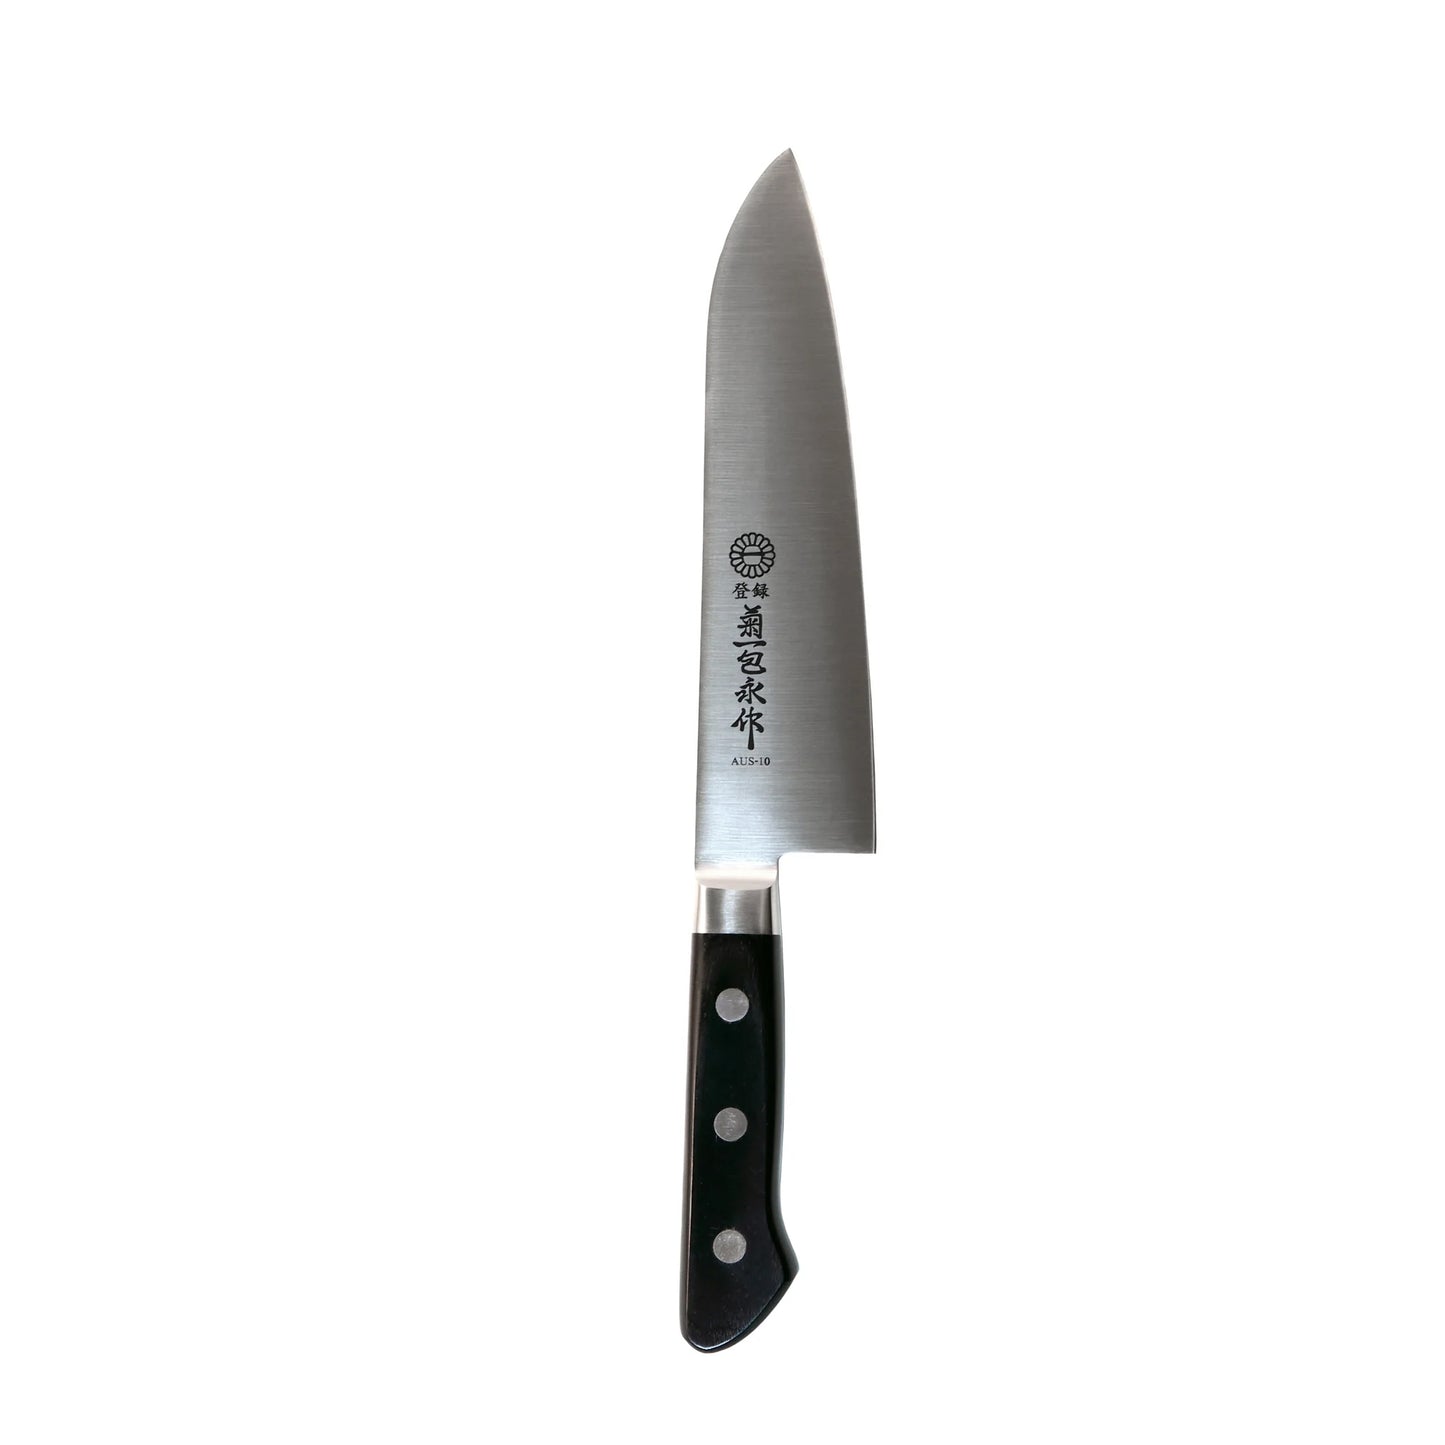 The Kikuichi GM Series Molybdenum Stainless Steel Santoku Knife, a remarkable fusion of performance, value, and craftsmanship.  It’s a versatile and reliable kitchen tool designed to excel at the three essential cutting tasks a Santoku knife is known for: slicing, dicing, and mincing.